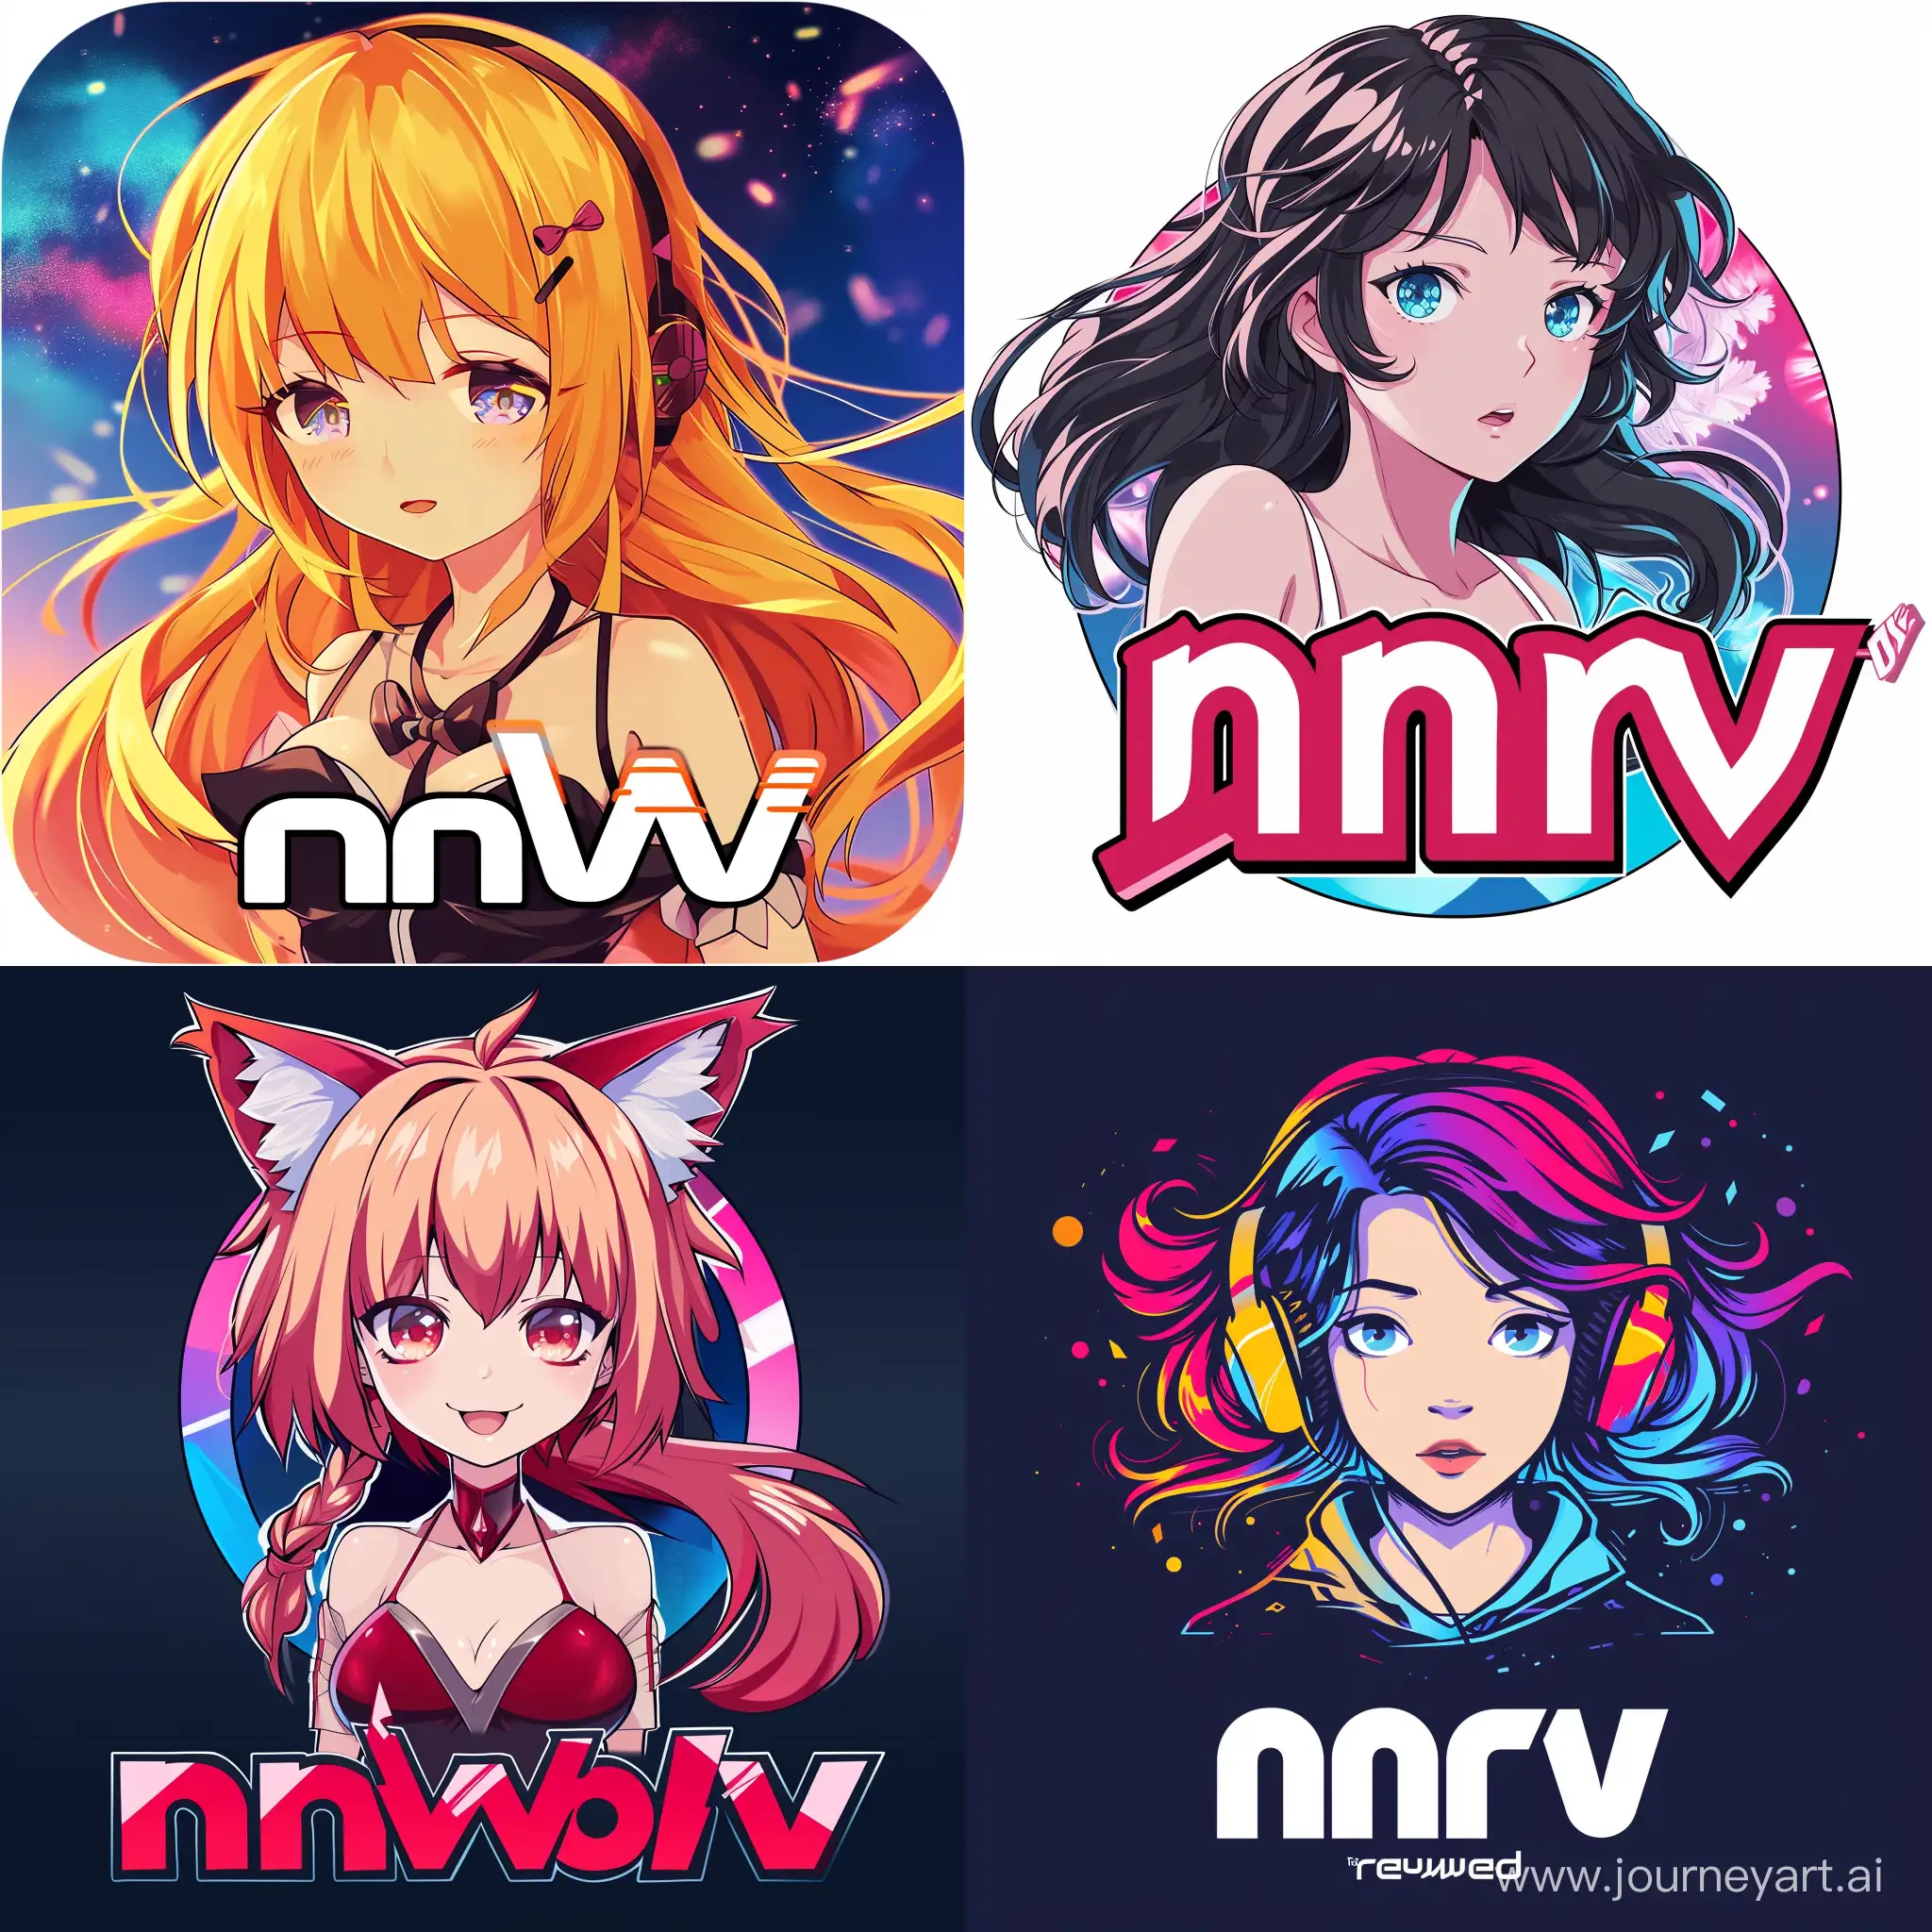 The logo of the anime channel mirv Telegram is an exclusive telegram channel dedicated to anime series, films and culture. With the name AniWord